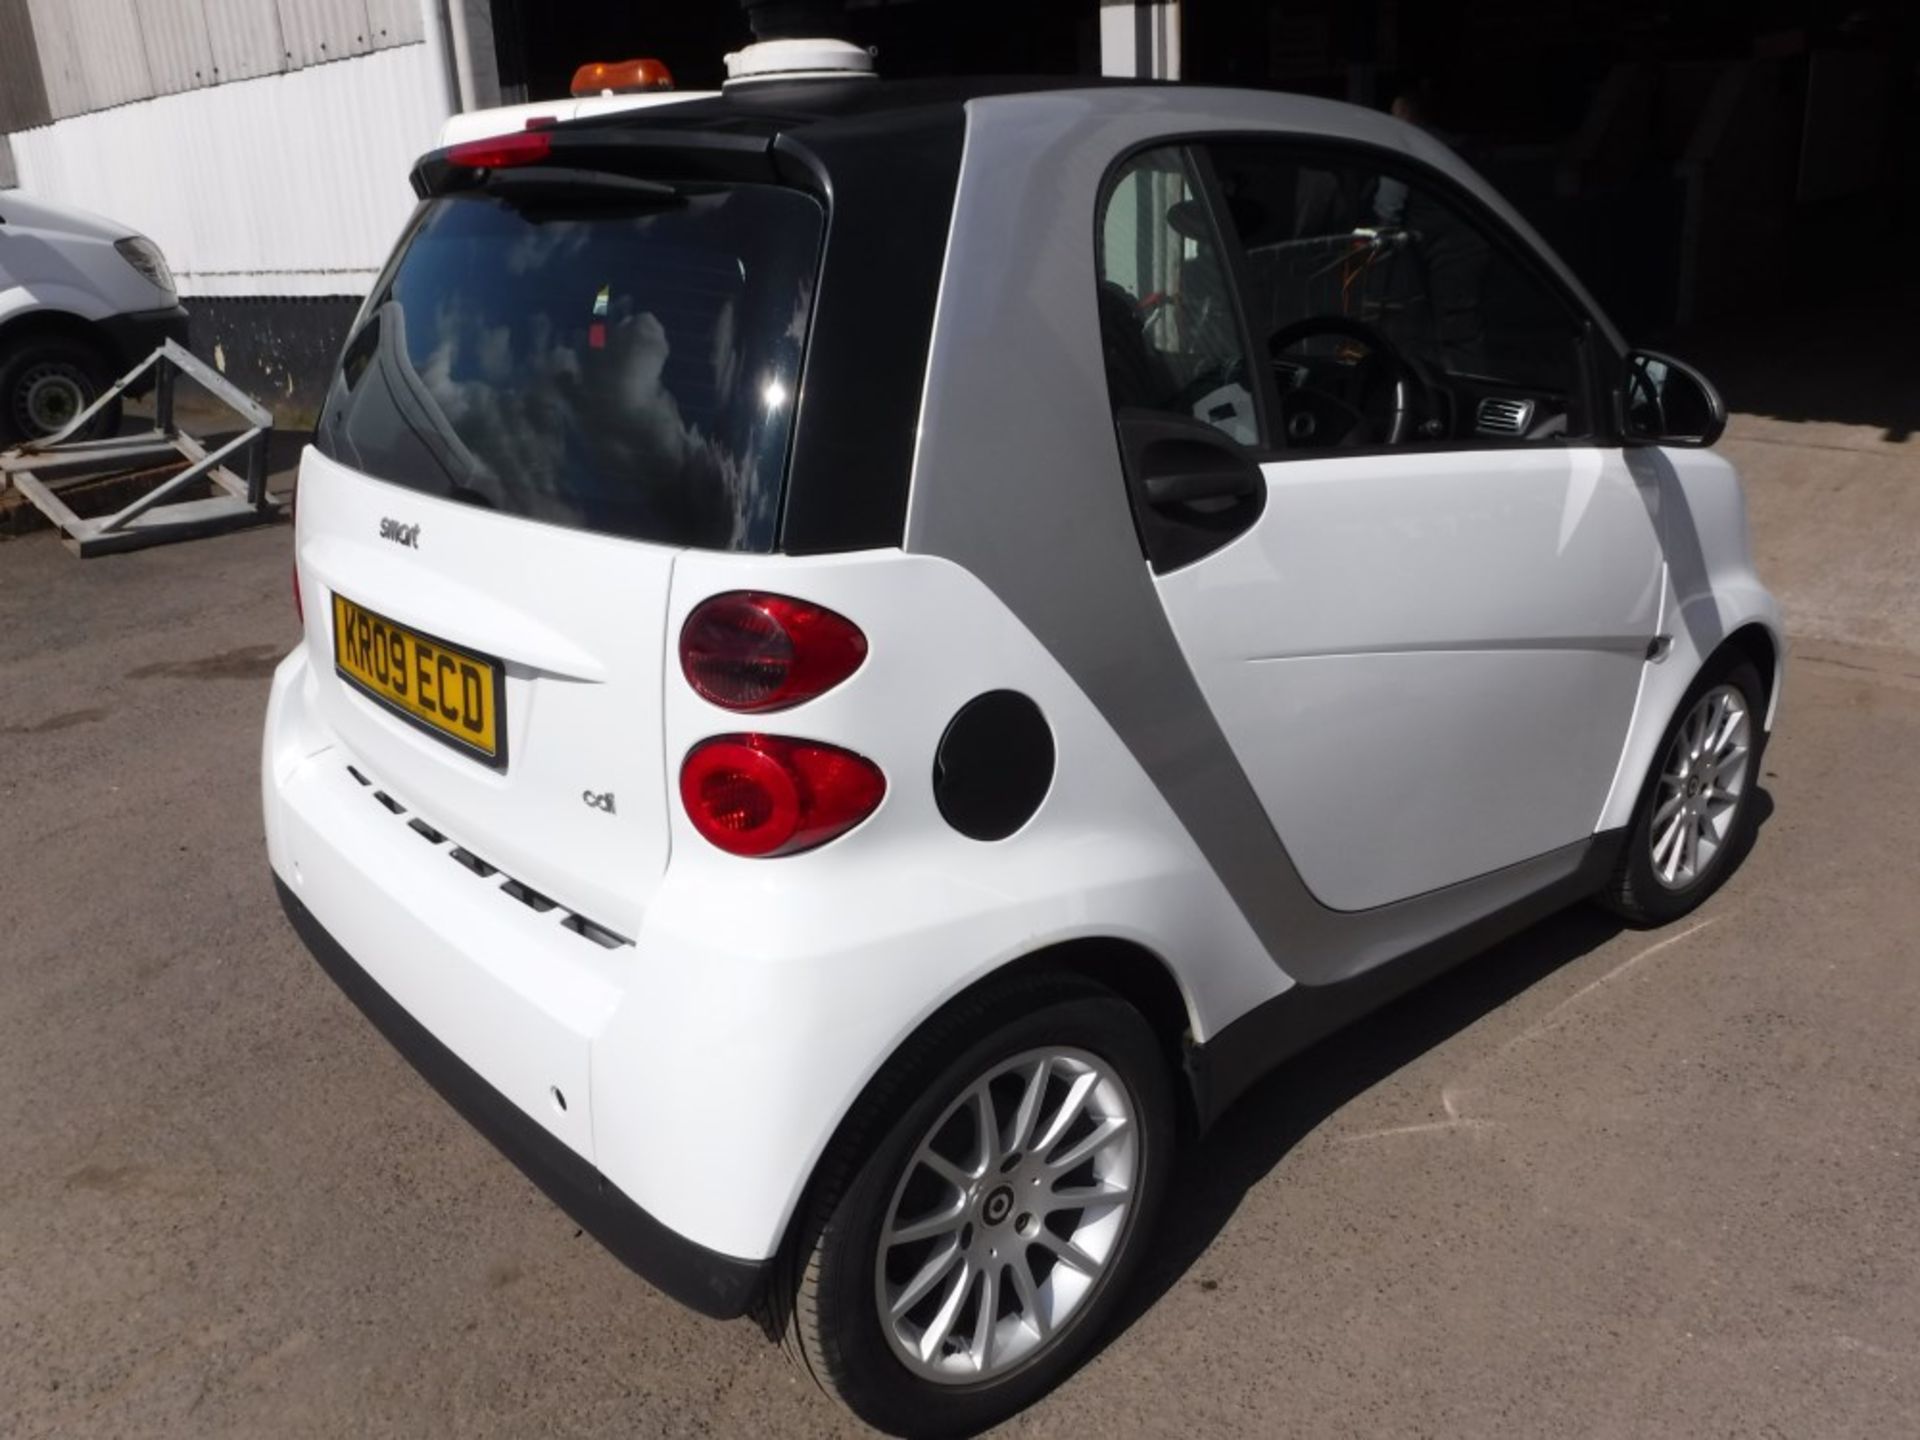 09 ref SMART FORTWO PASSION CDI AUTO COUPE, 1ST REG 06/09, TEST 06/16, 42483M WARRANTED, V5 HERE, - Image 4 of 5